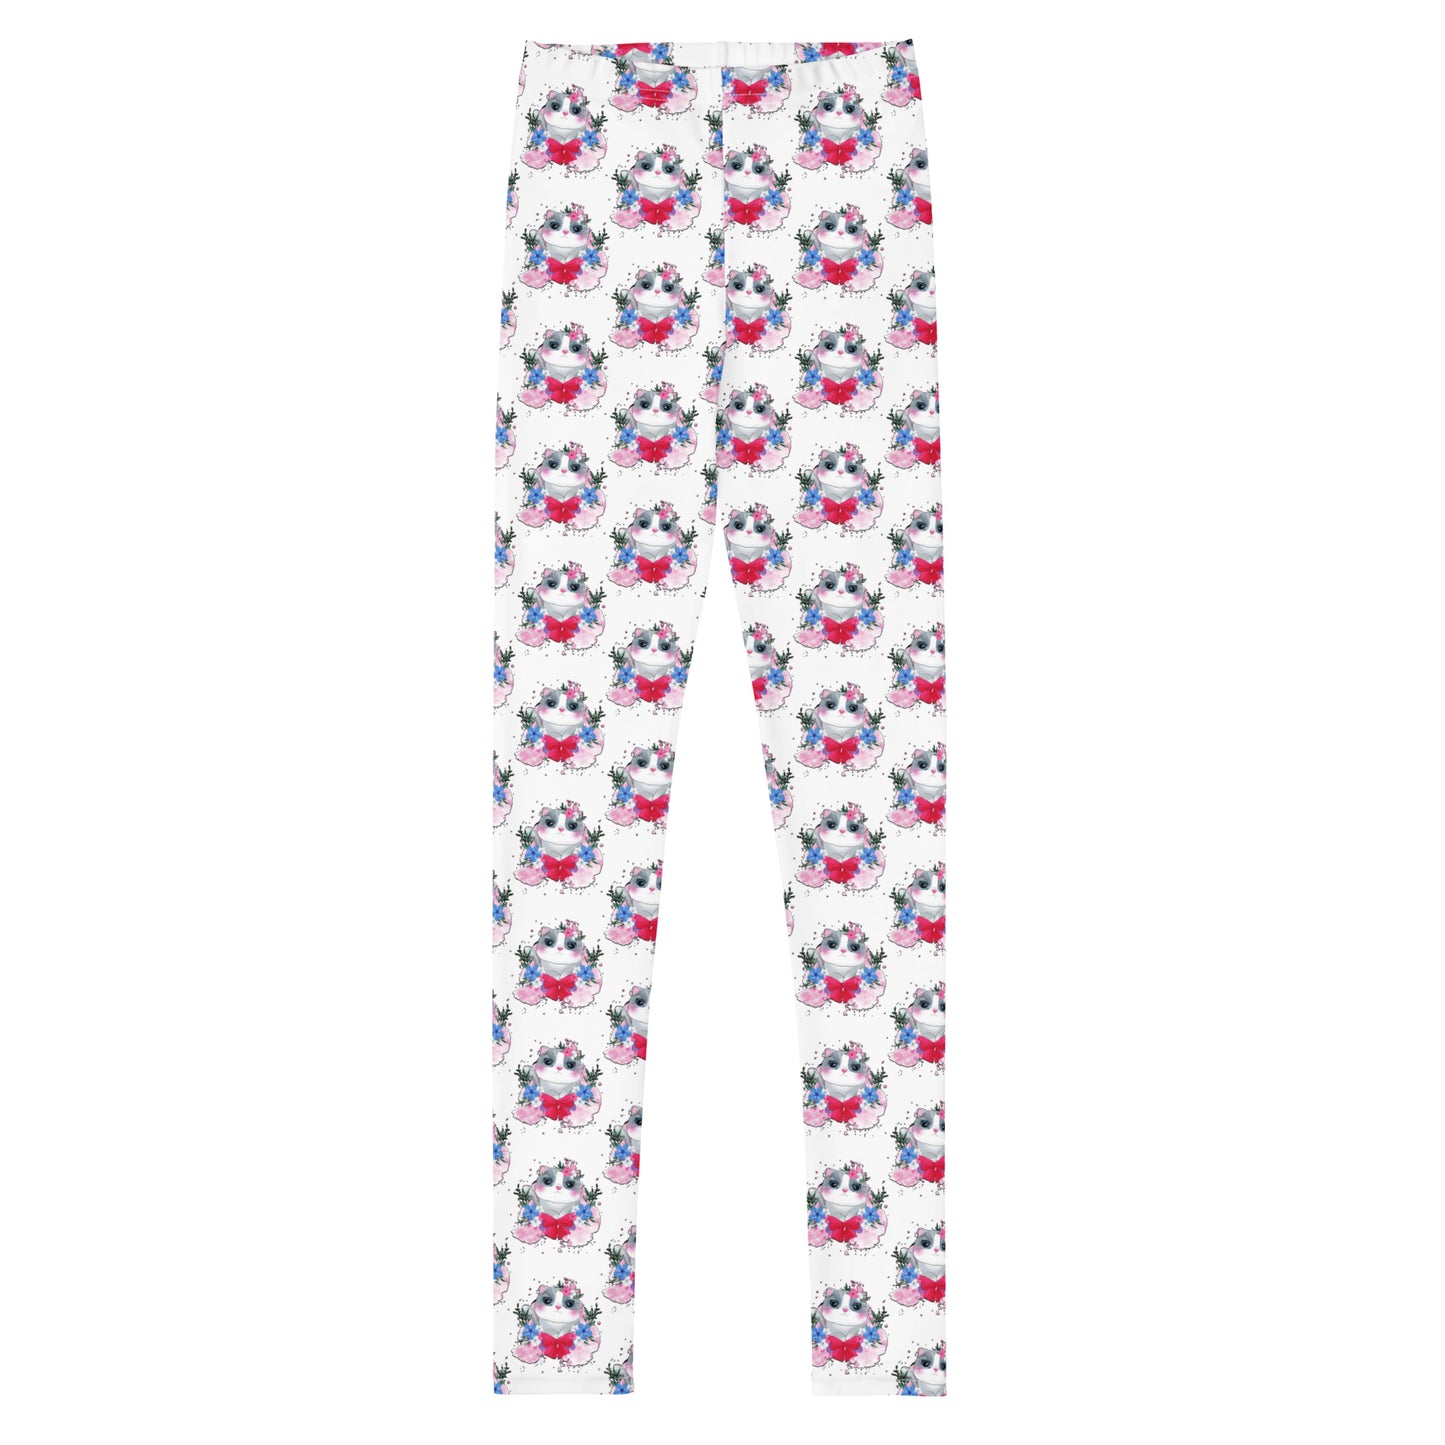 Cute Kitty Cat with Flowers Leggings, No. 0328